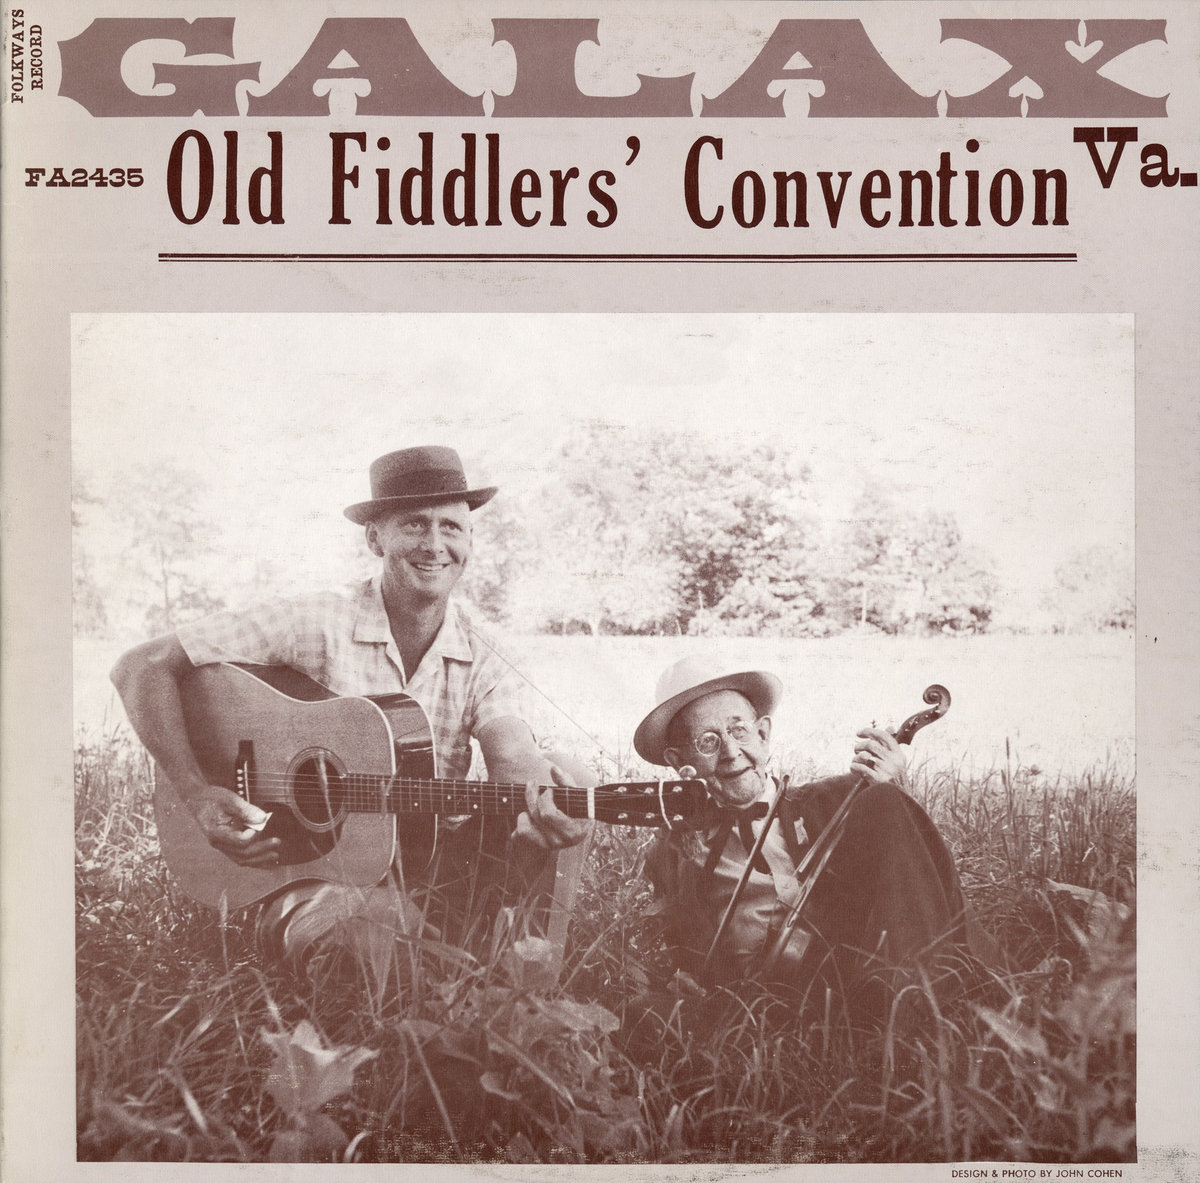 88th Annual Galax Old Fiddler’s Convention